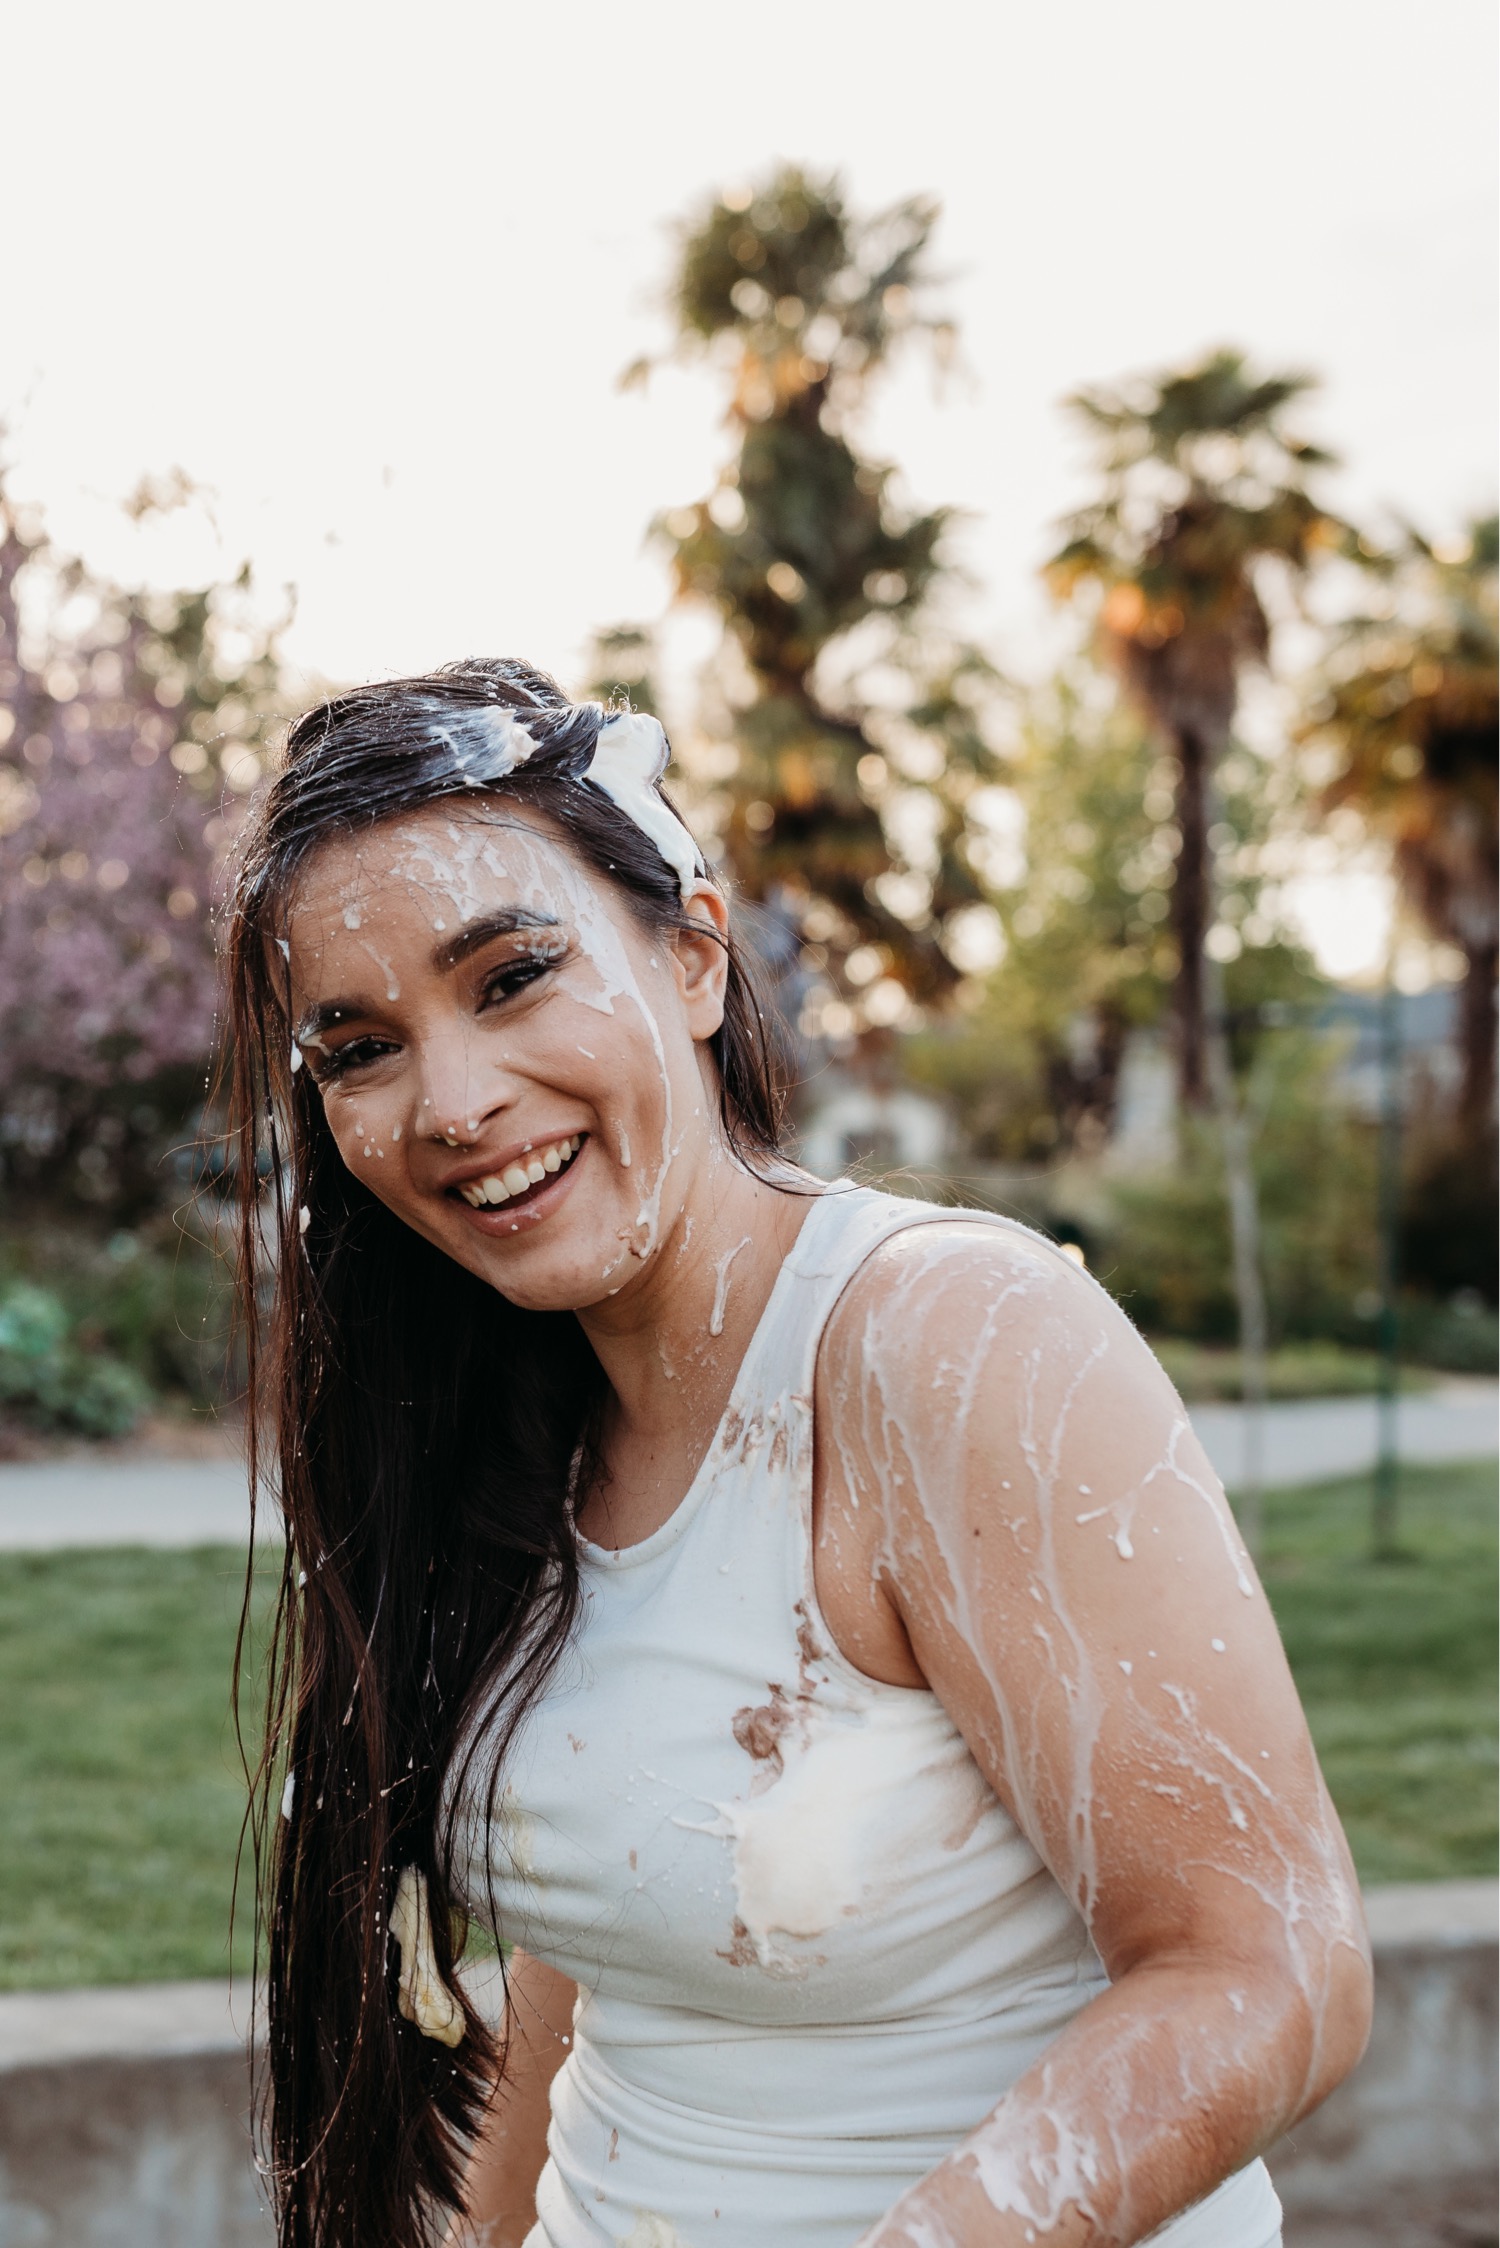 Woman covered in ice cream smiles big at the camera during her engagement photoshoot.